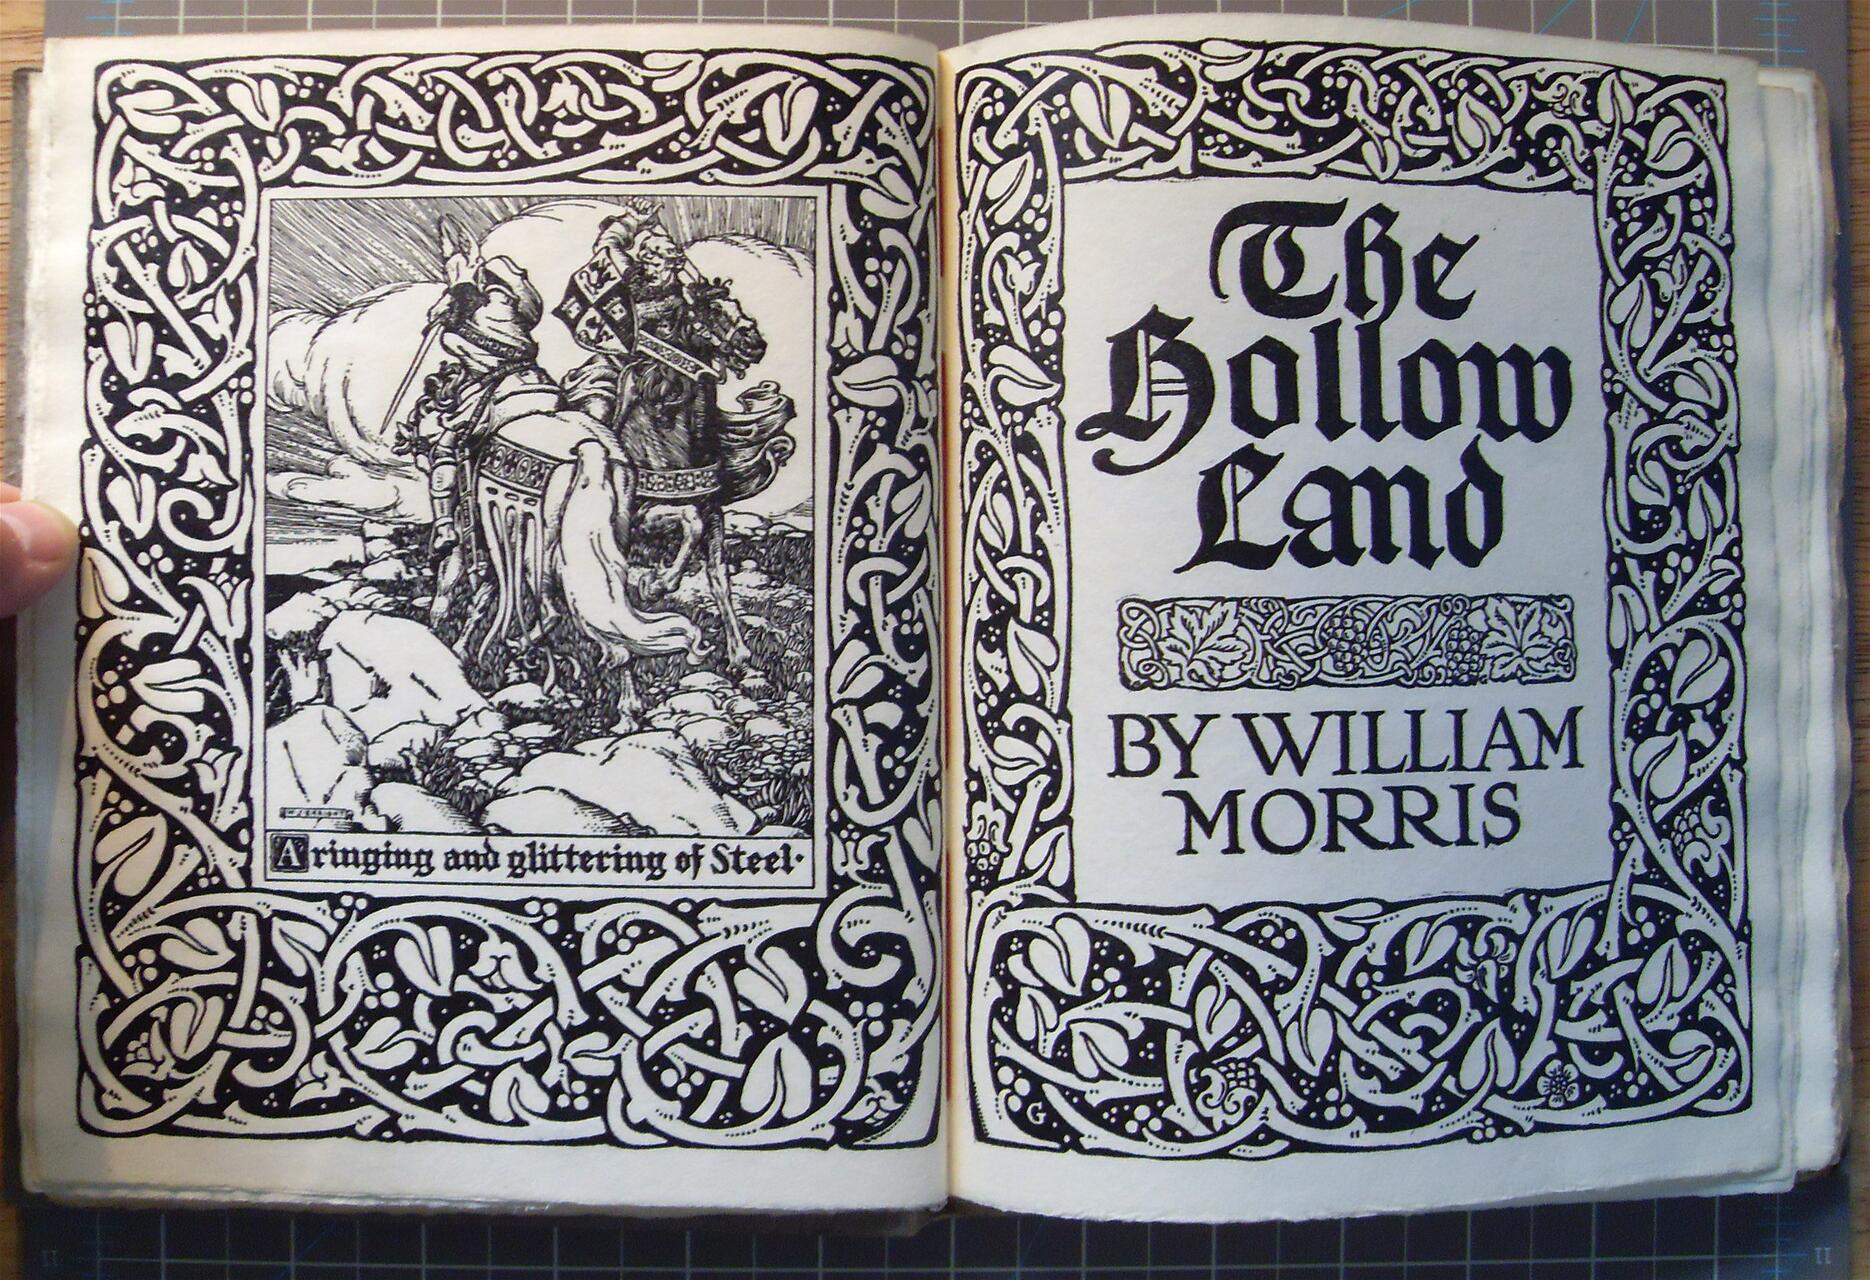 19A-183_The Hollow Land book design_Frederic W. Goudy